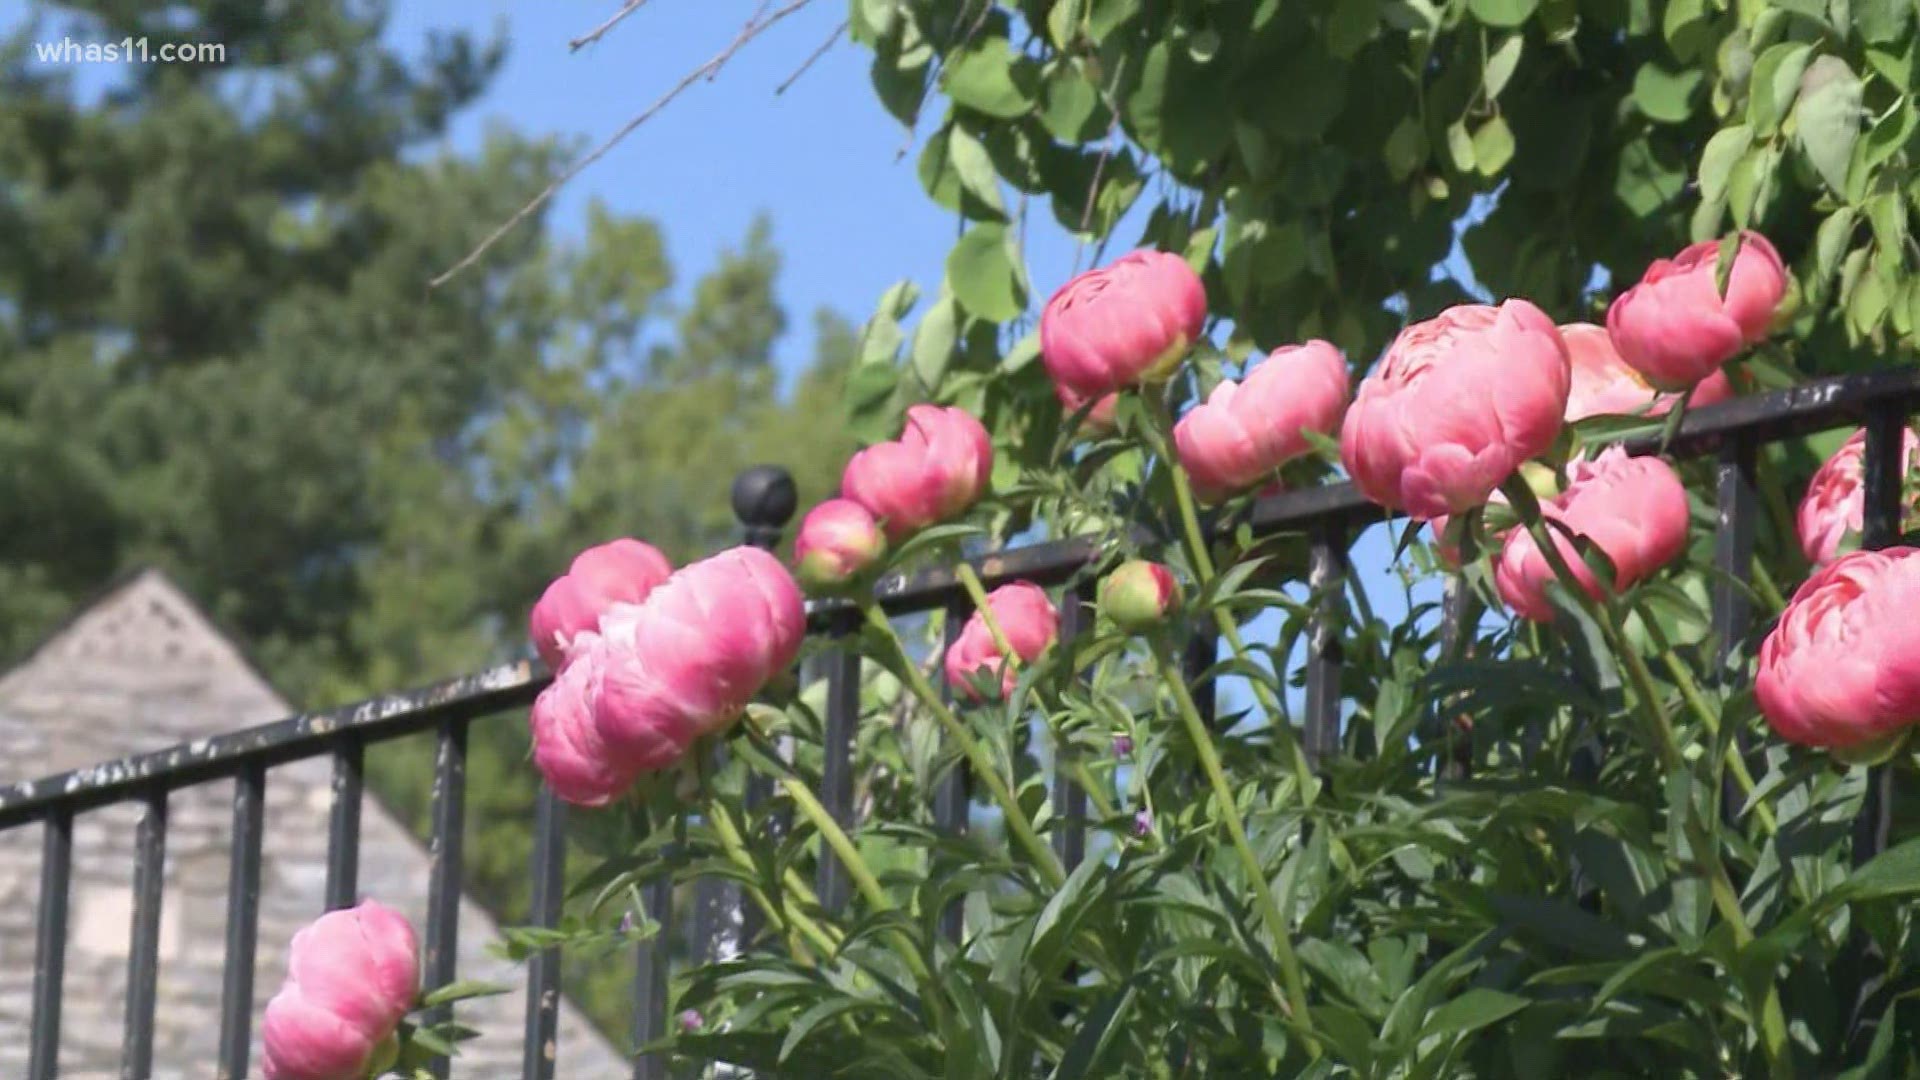 With Mother's Day tomorrow, you could check out the Botanical Gardens. It's nearing the end of peony season so you'll see some beautiful blooms.